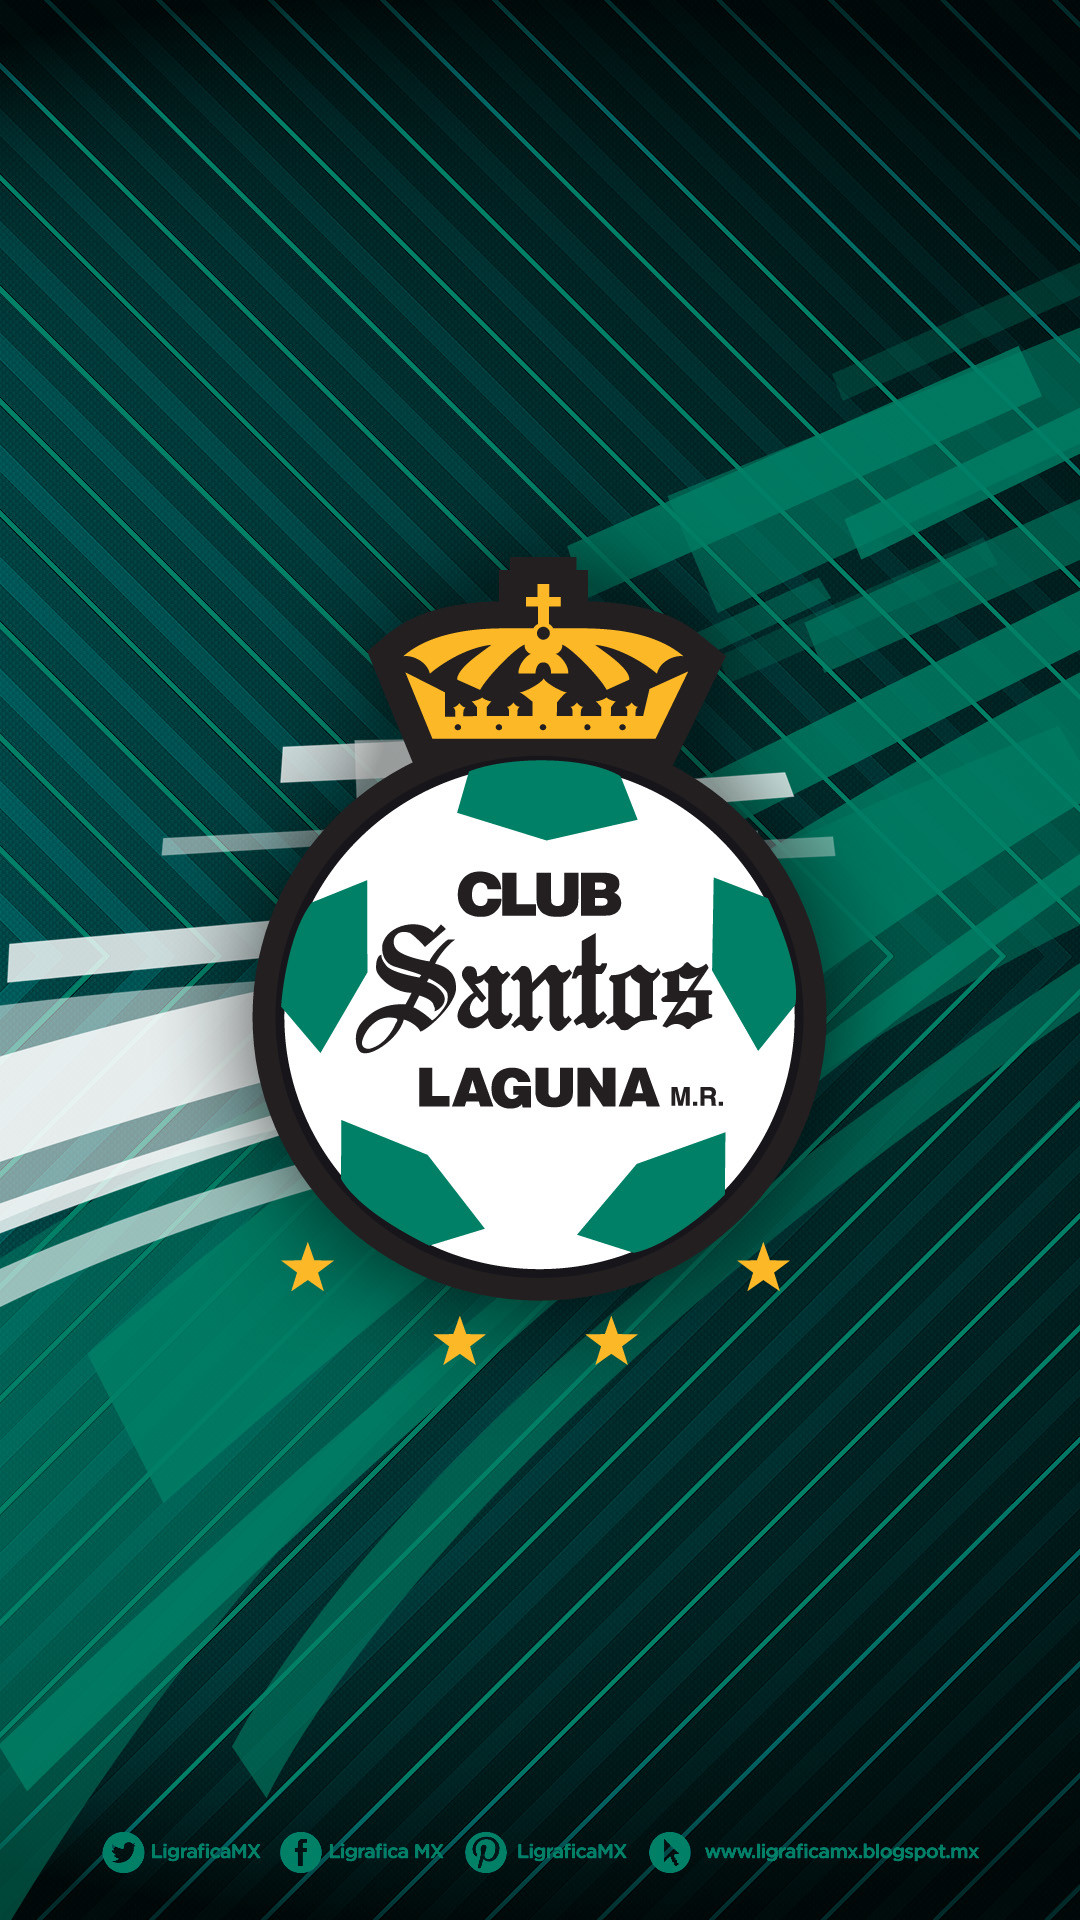 1080x1920 When I'm not going for chivas I'm going for santos!